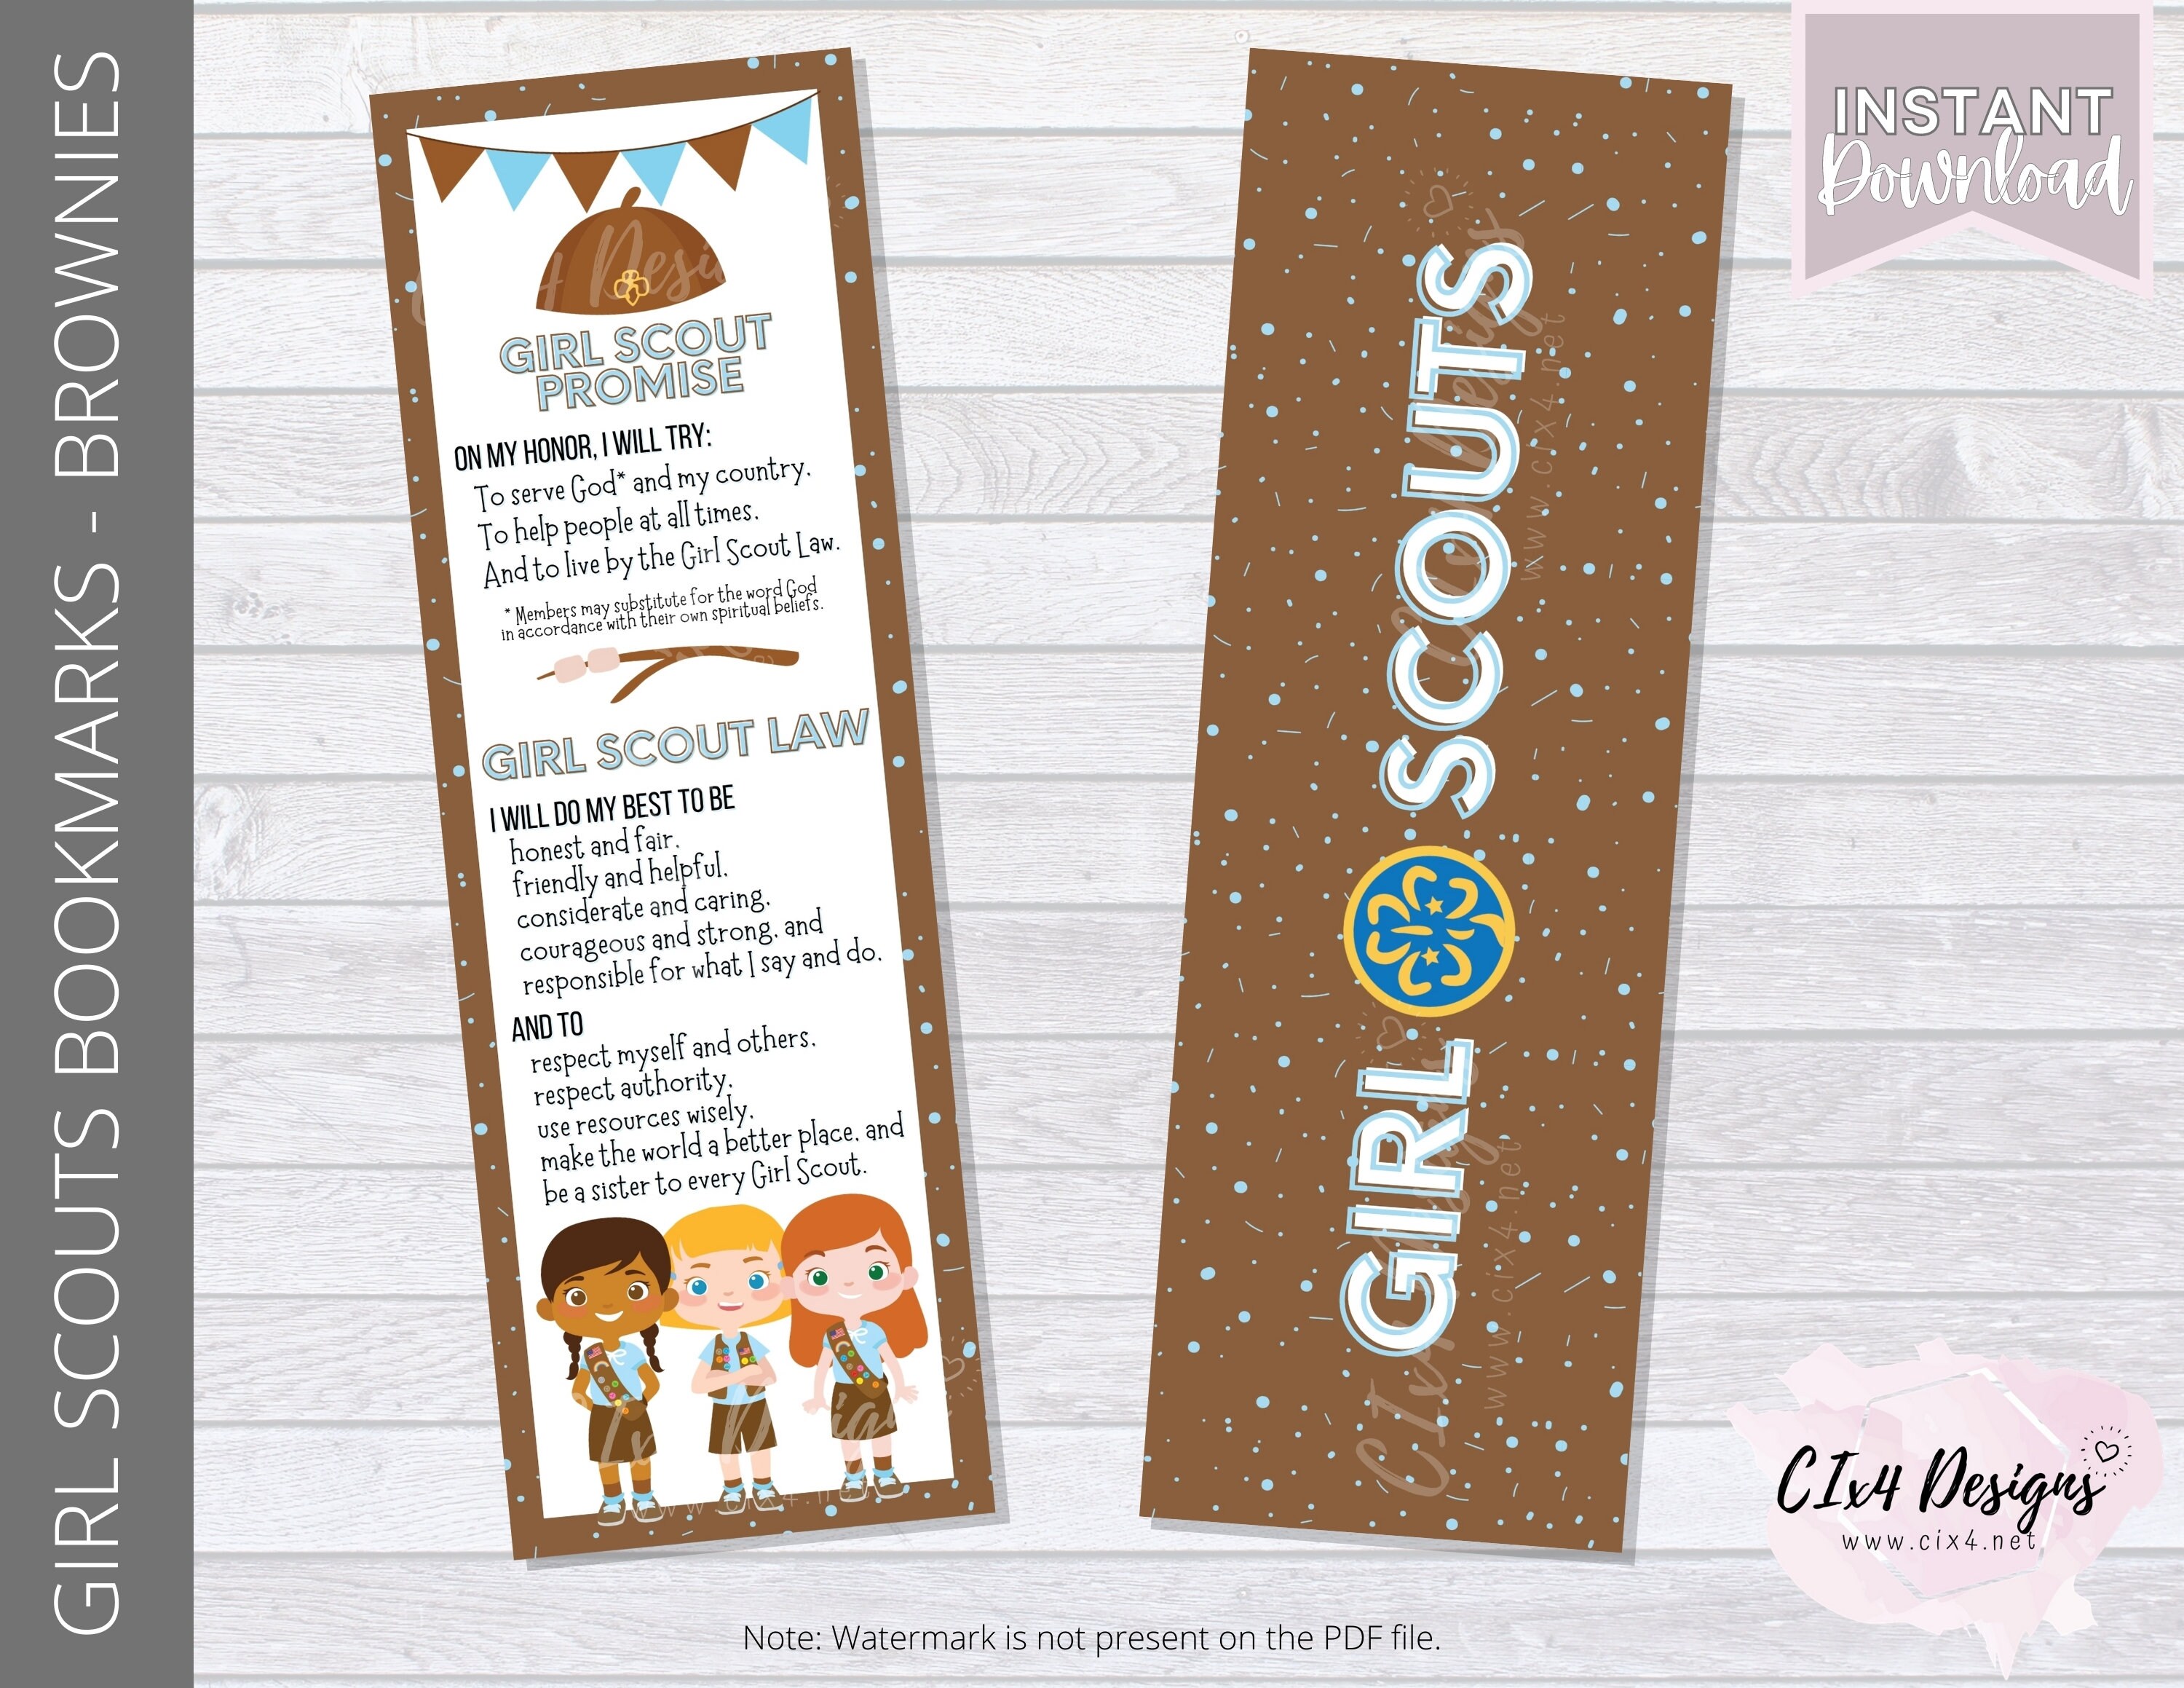 Girl Scouts Bookmarks Brownies Printable image image photo